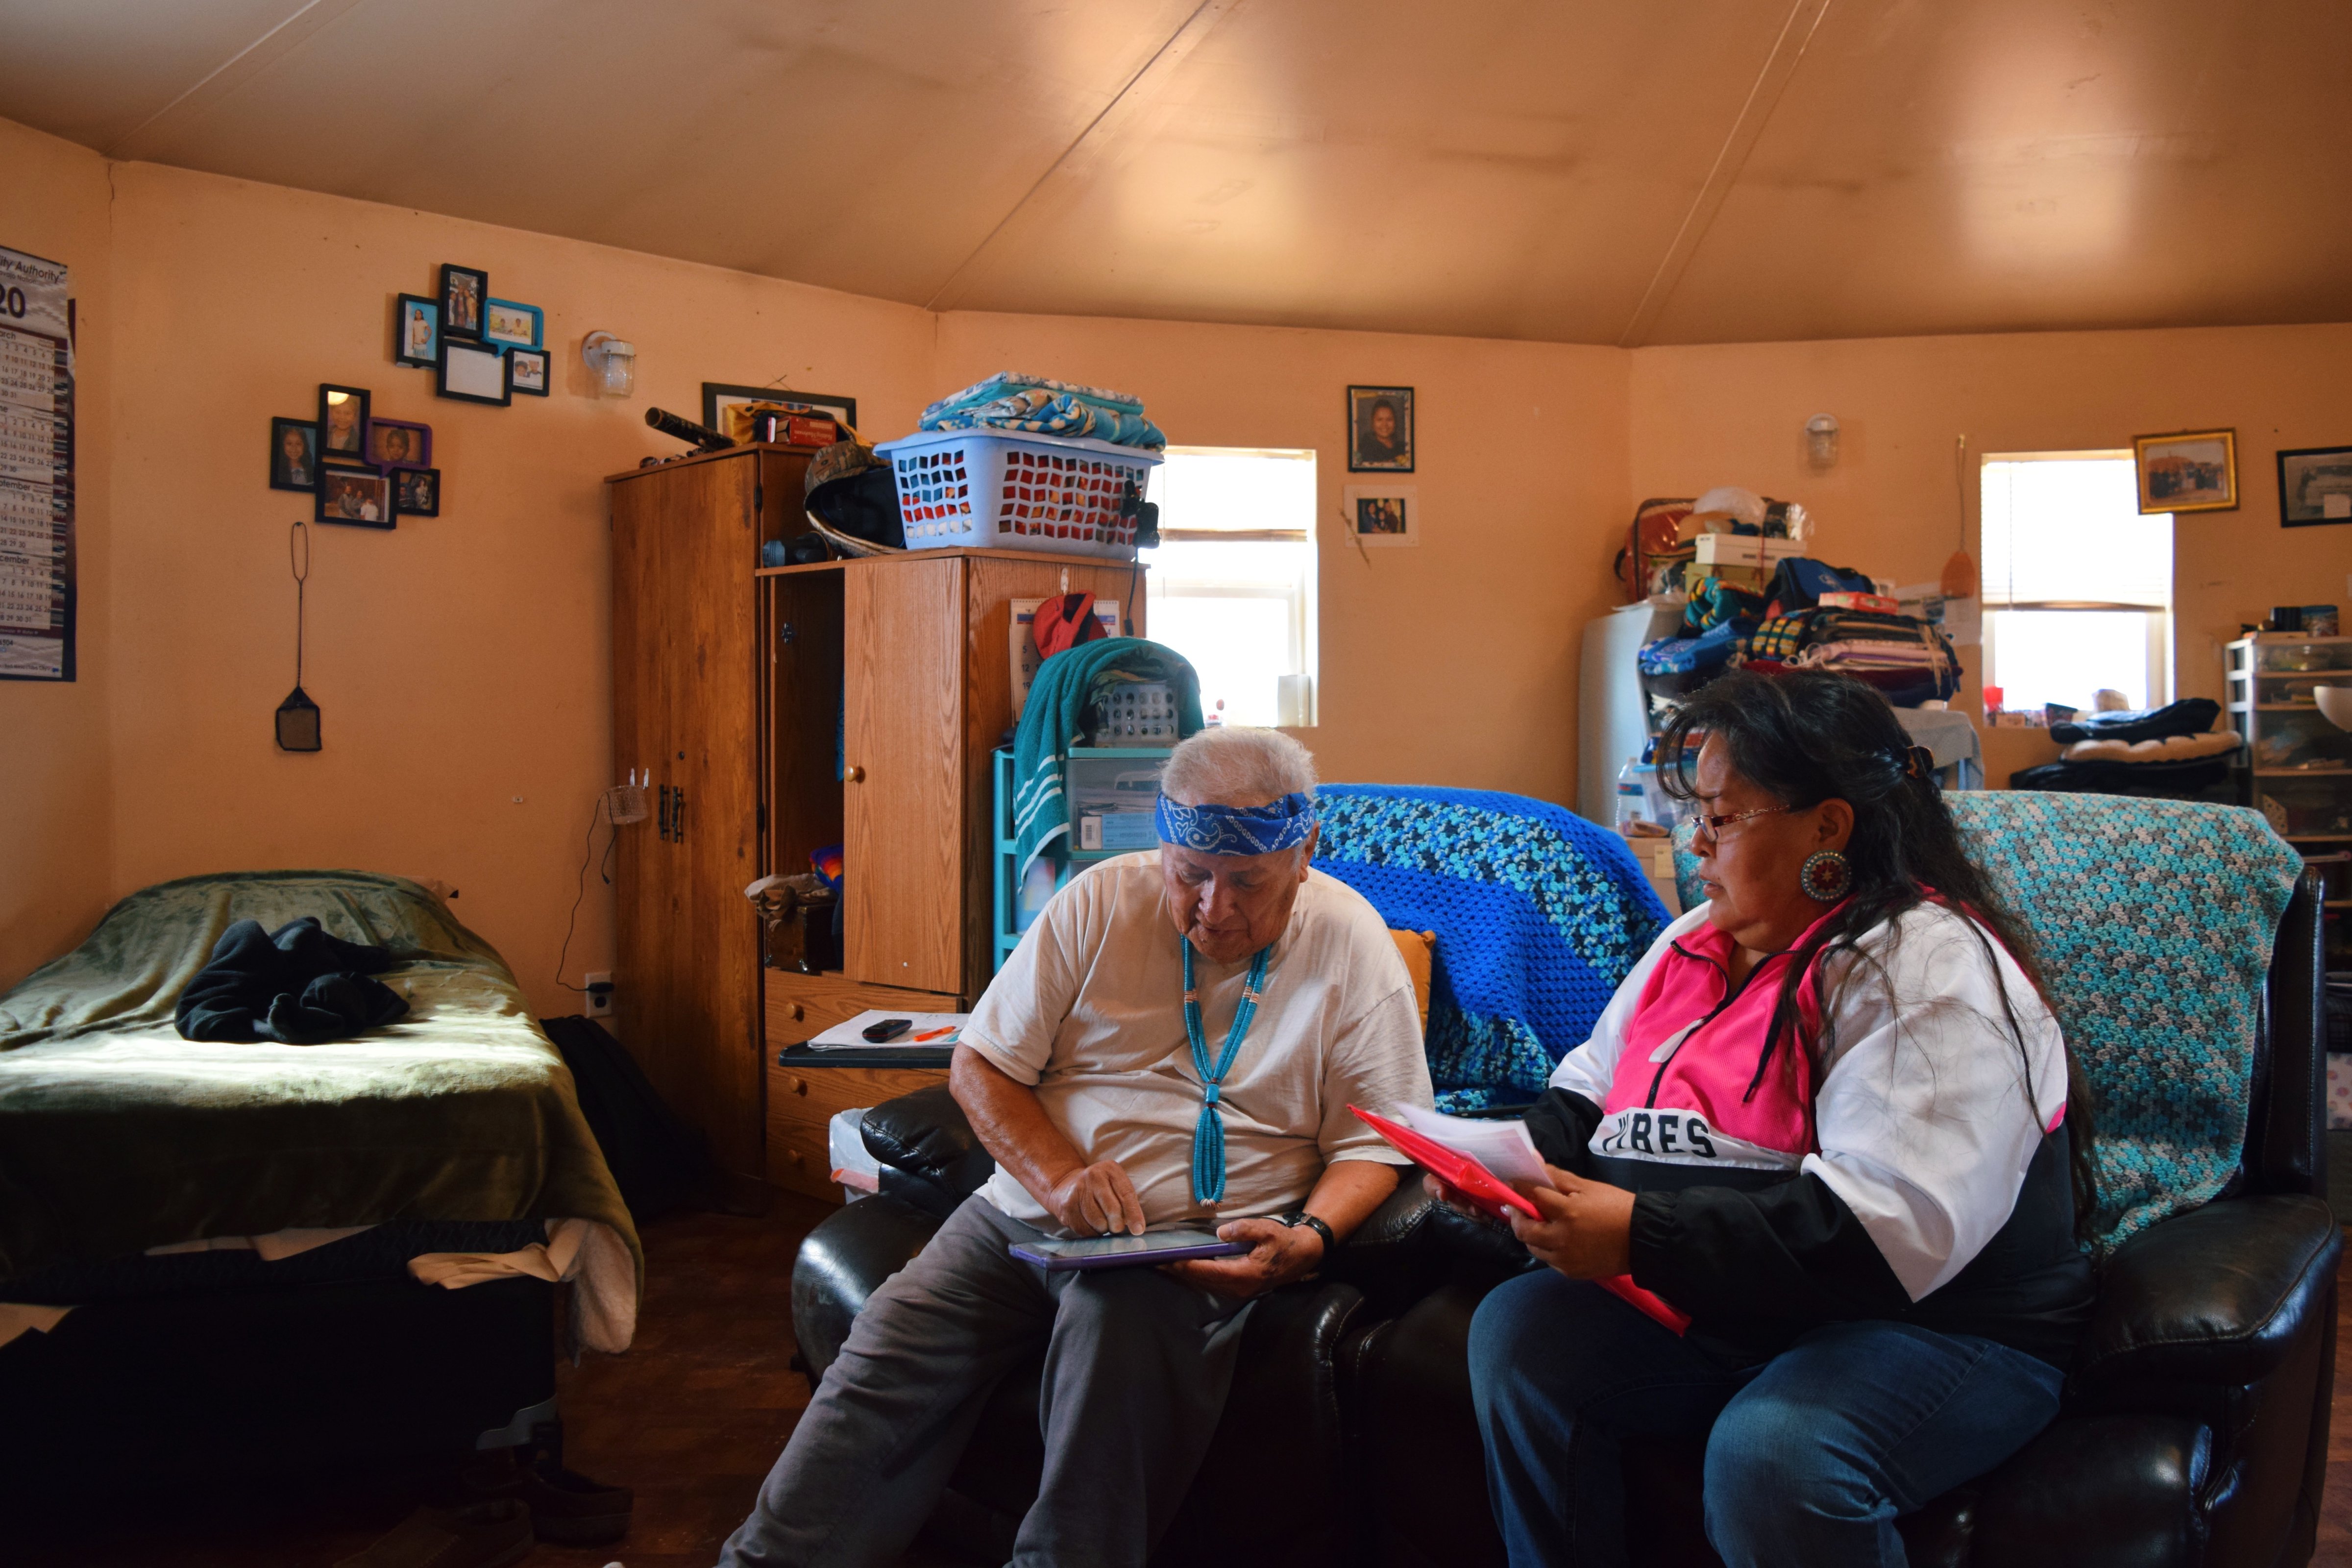 Dalene Redhorse, a field organizer for Rural Utah Project, helps a medicine man update his voter registration and plus code address in Monument Valley, on the Navajo Nation in 2019. (Madeline McGill/Rural Utah Project)